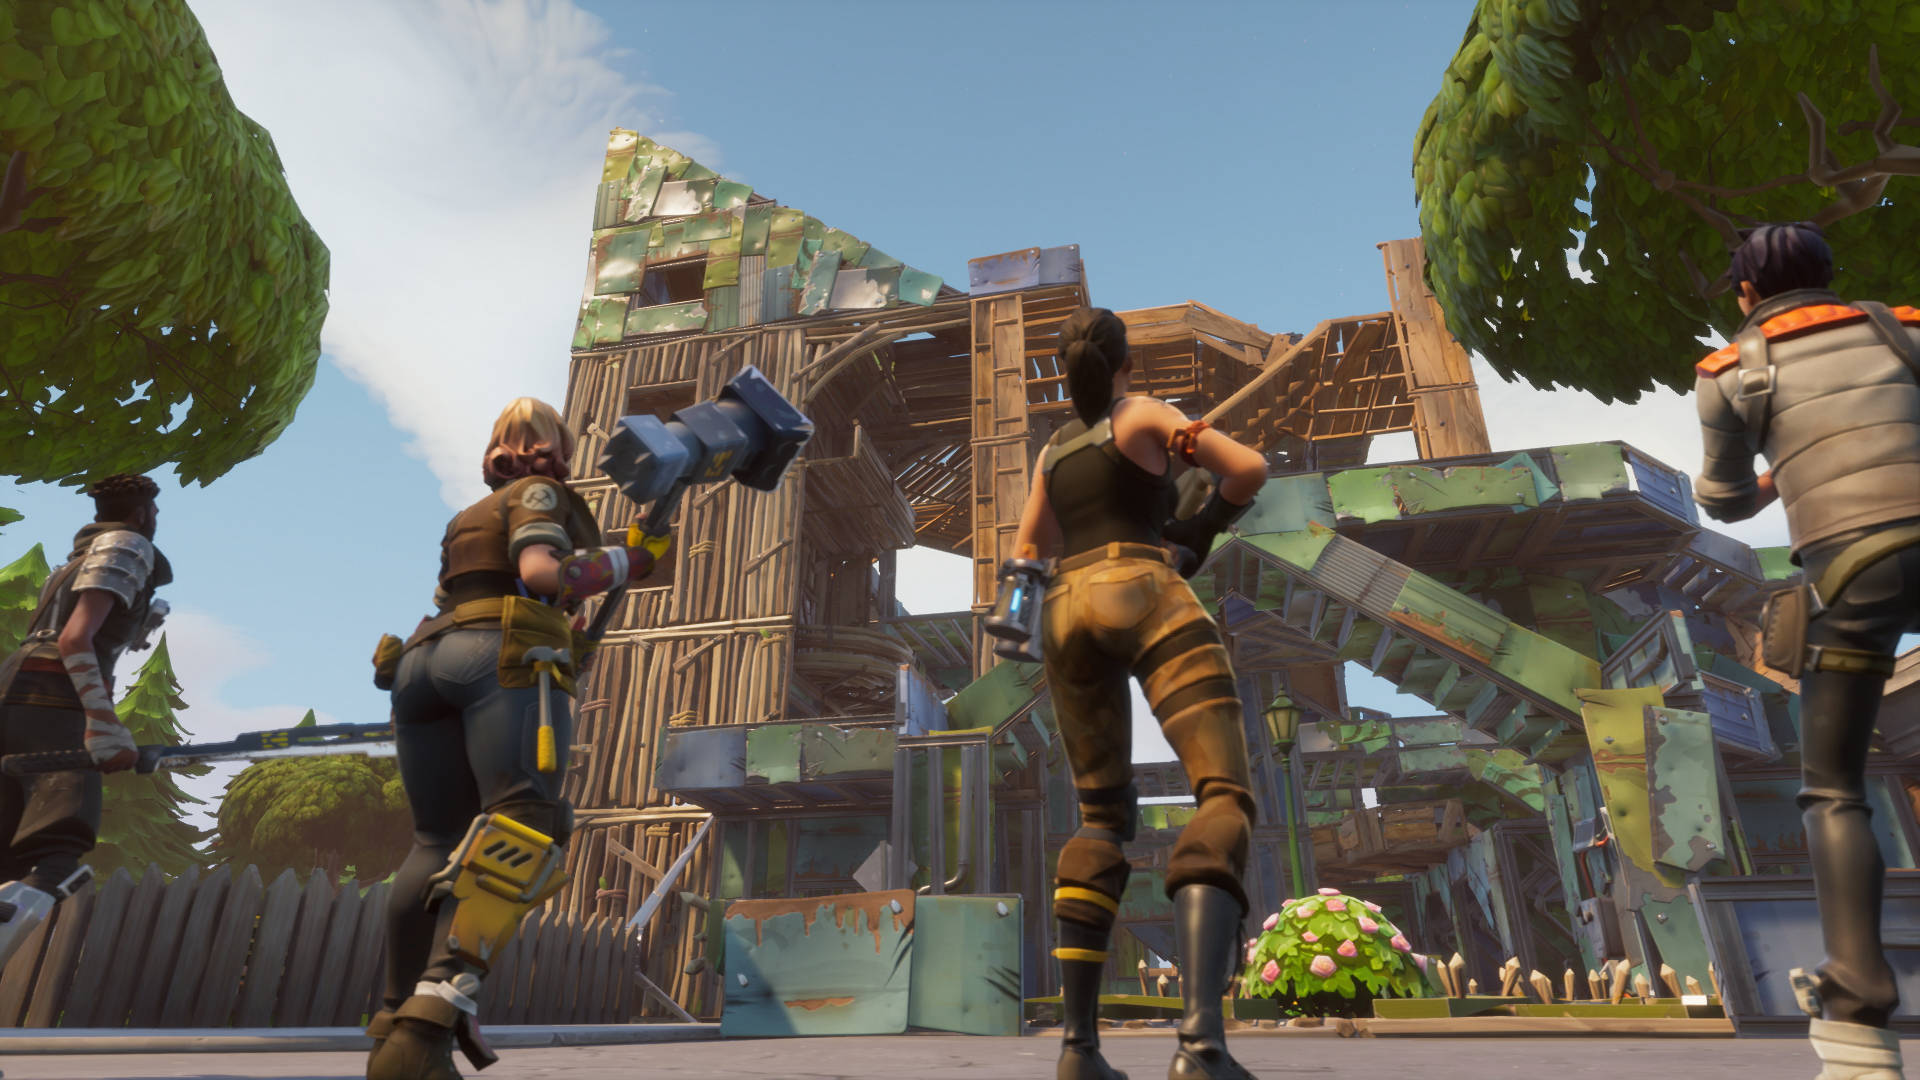 imspeedygonzales has created a practice course for building and editing in fortnite - course de quad fortnite